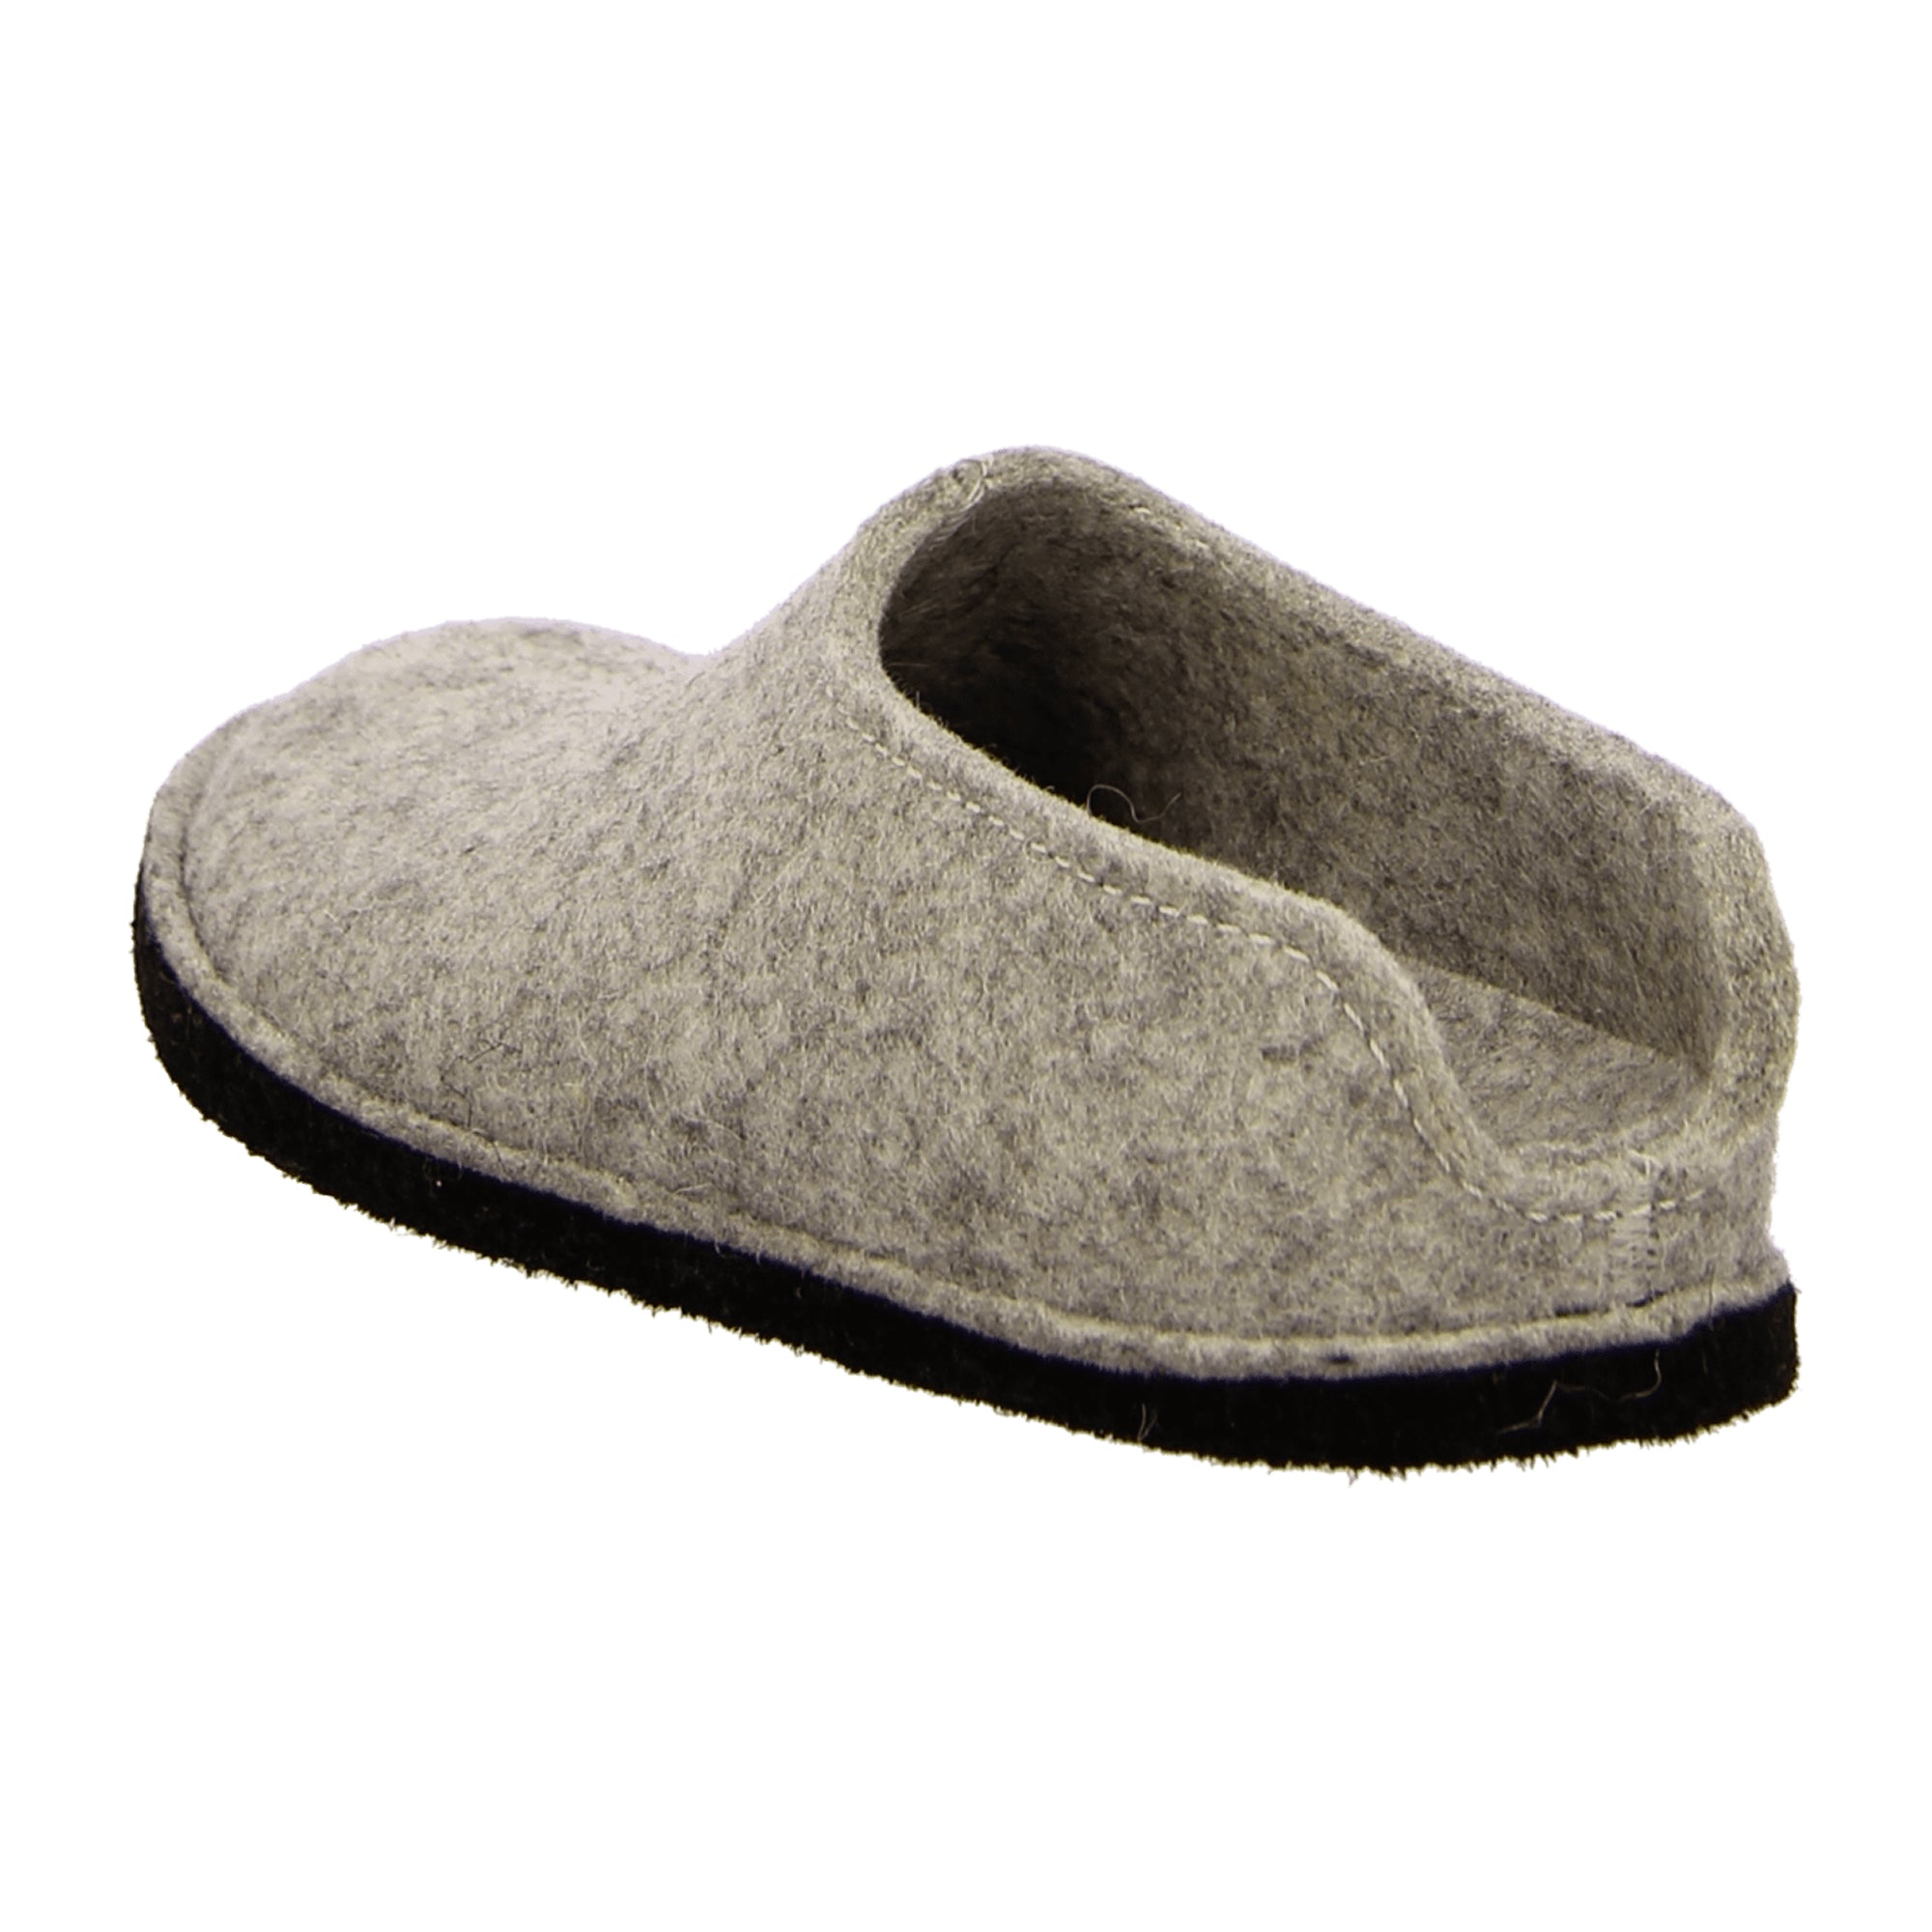 Haflinger Flair Smily Women's Slippers, Stylish Gray Wool - Durable & Comfortable